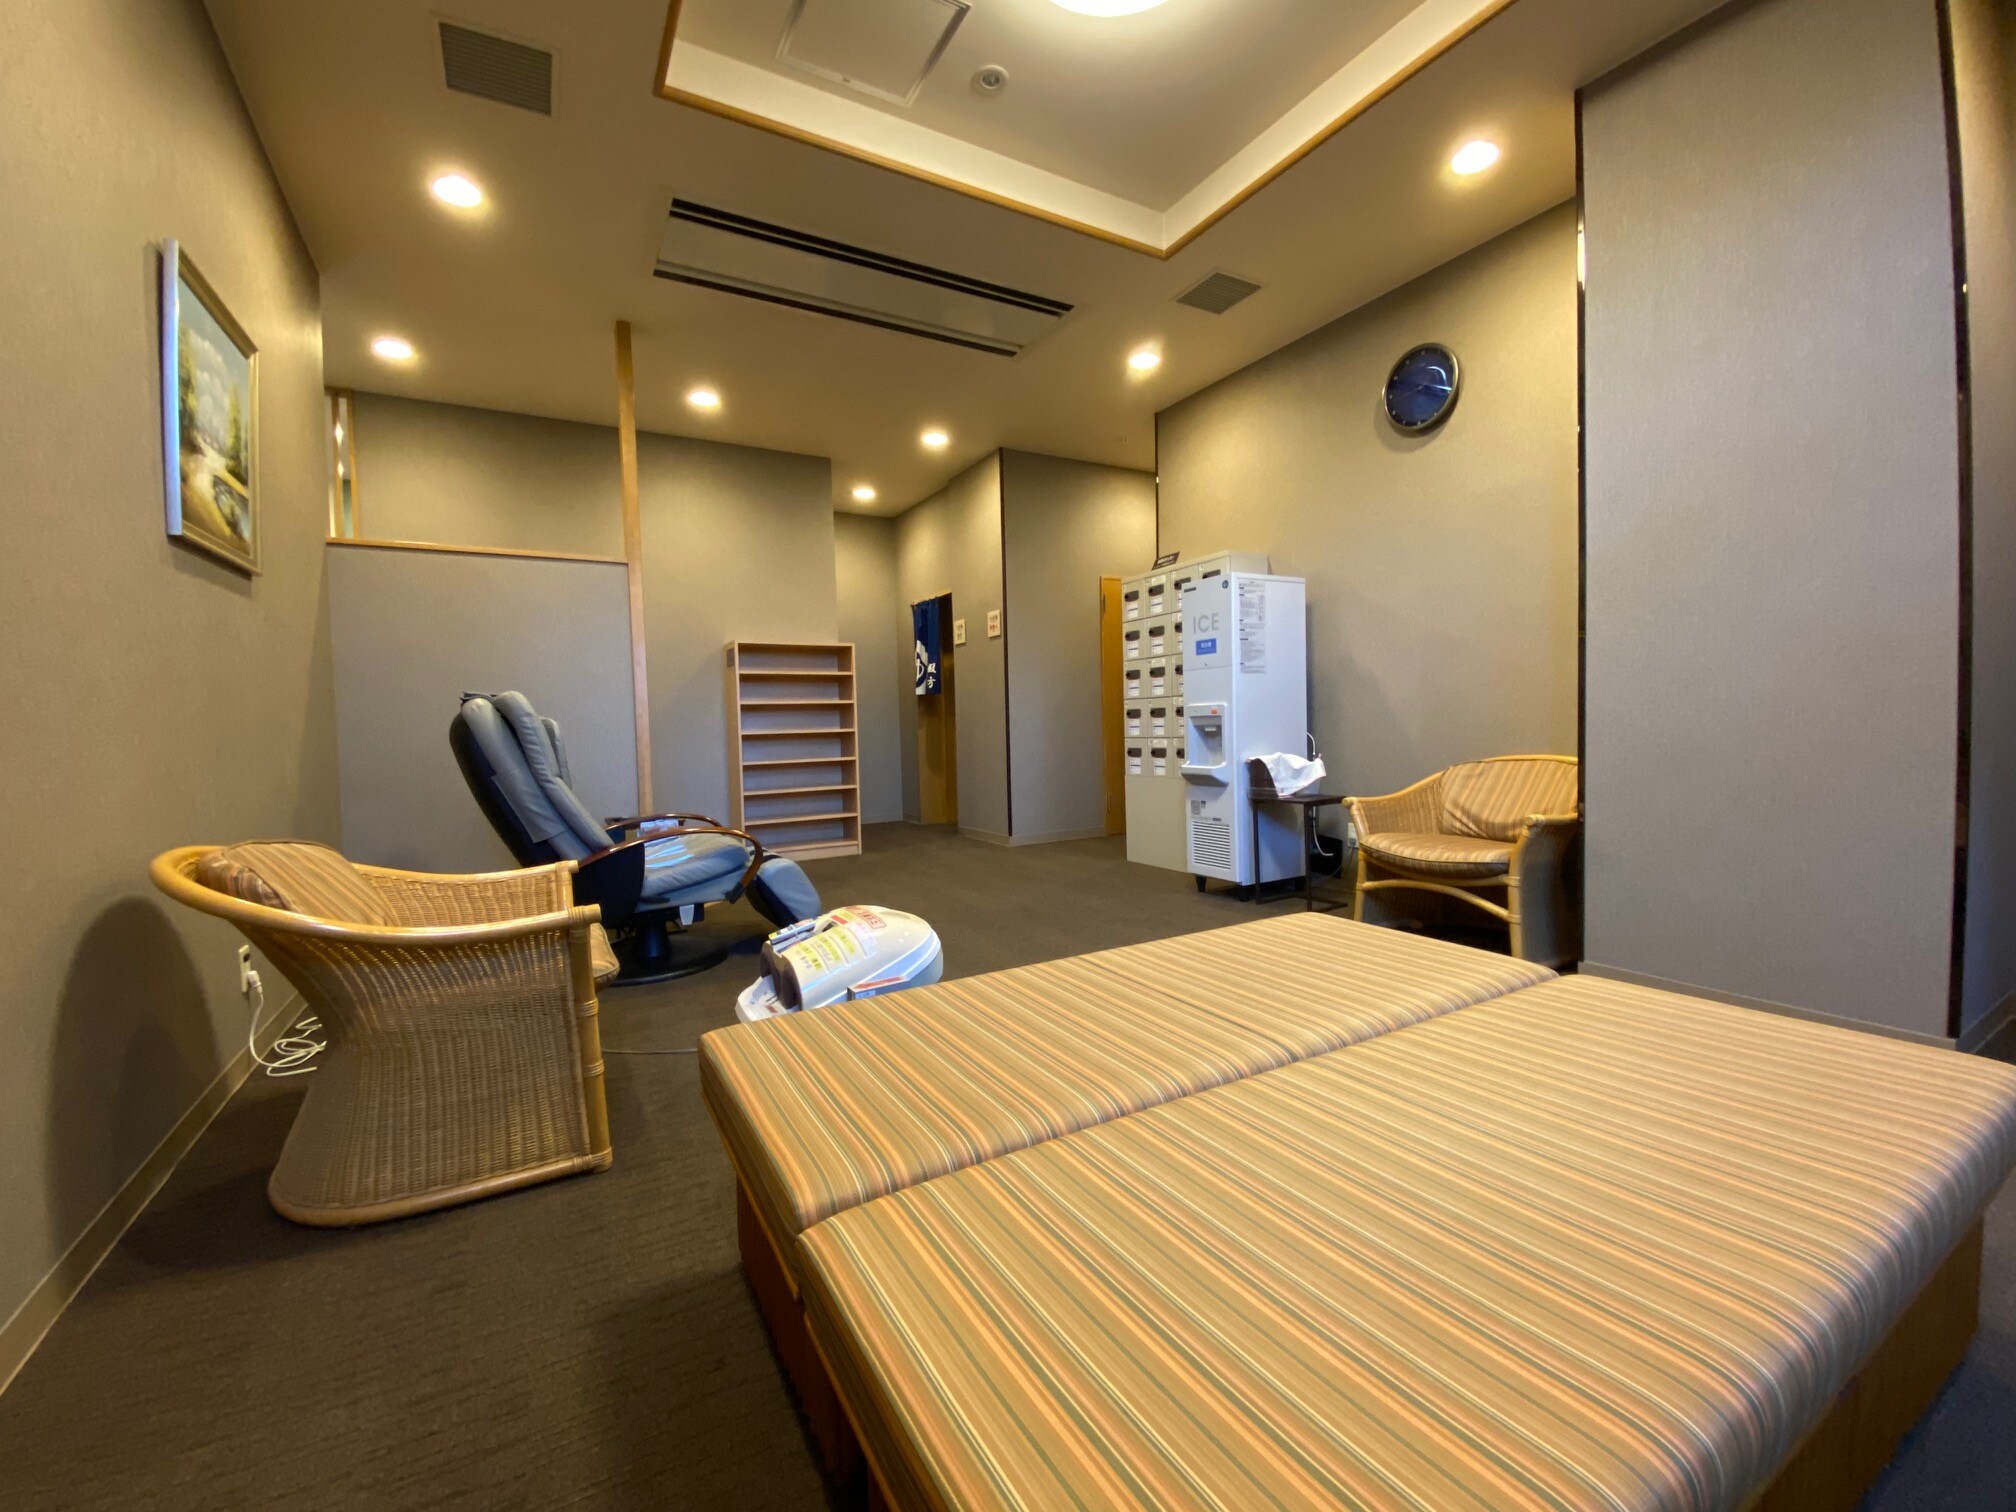 Relaxation room usage time 15: 00-midnight 02:00, next morning 05:00 to 10:00